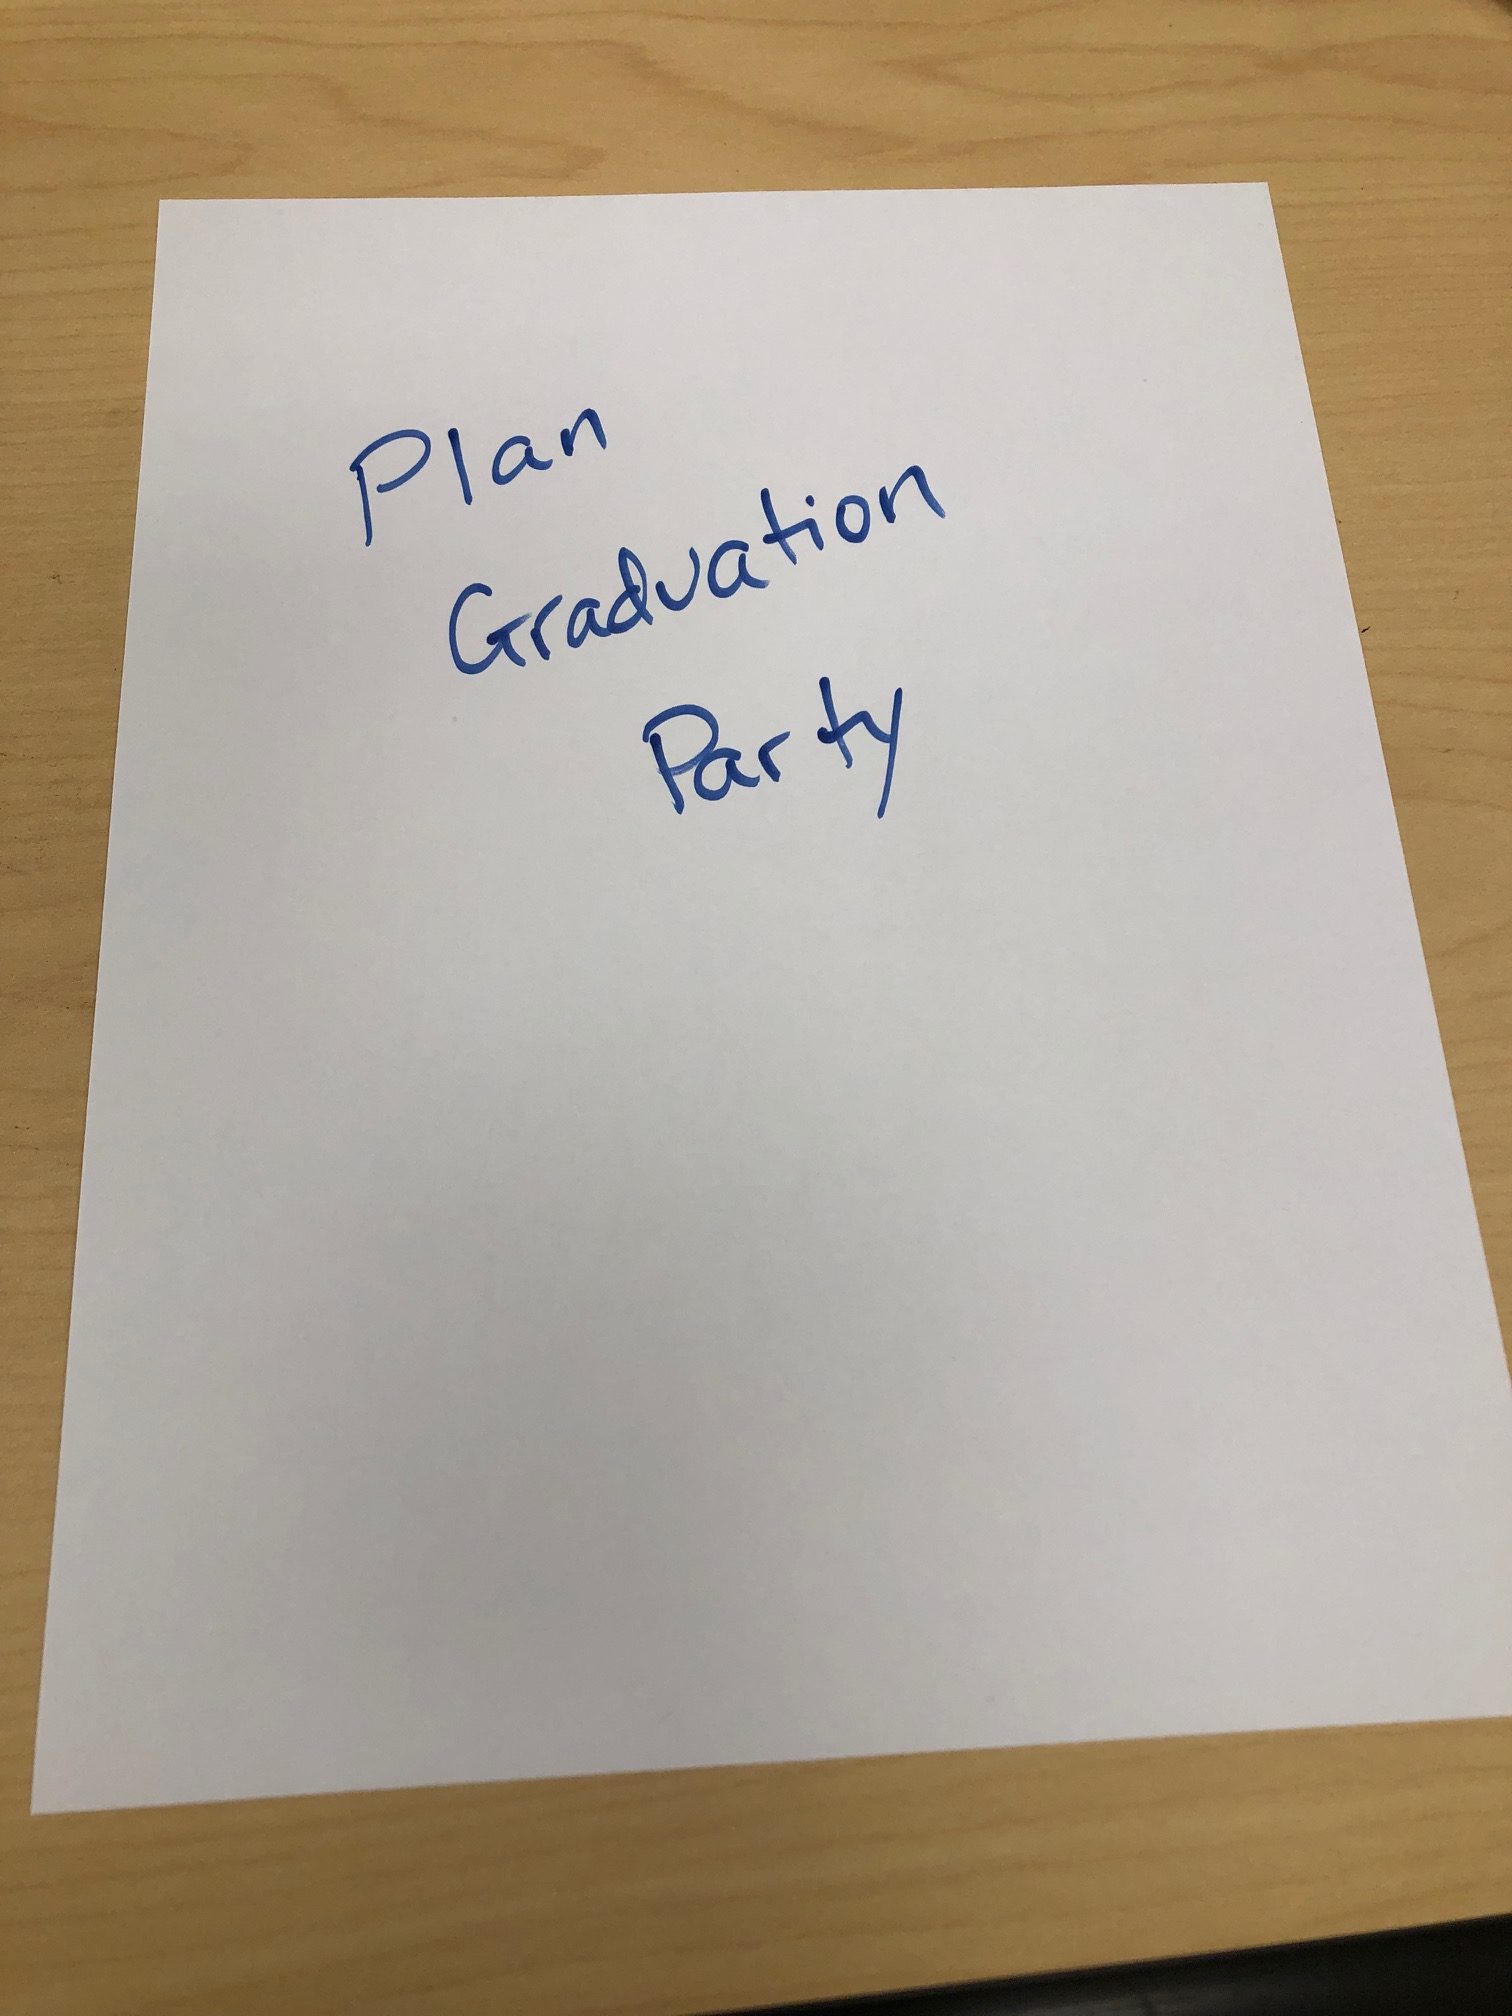 Put every idea down on a separate piece of paper will help ease sandwich generation overwhelm